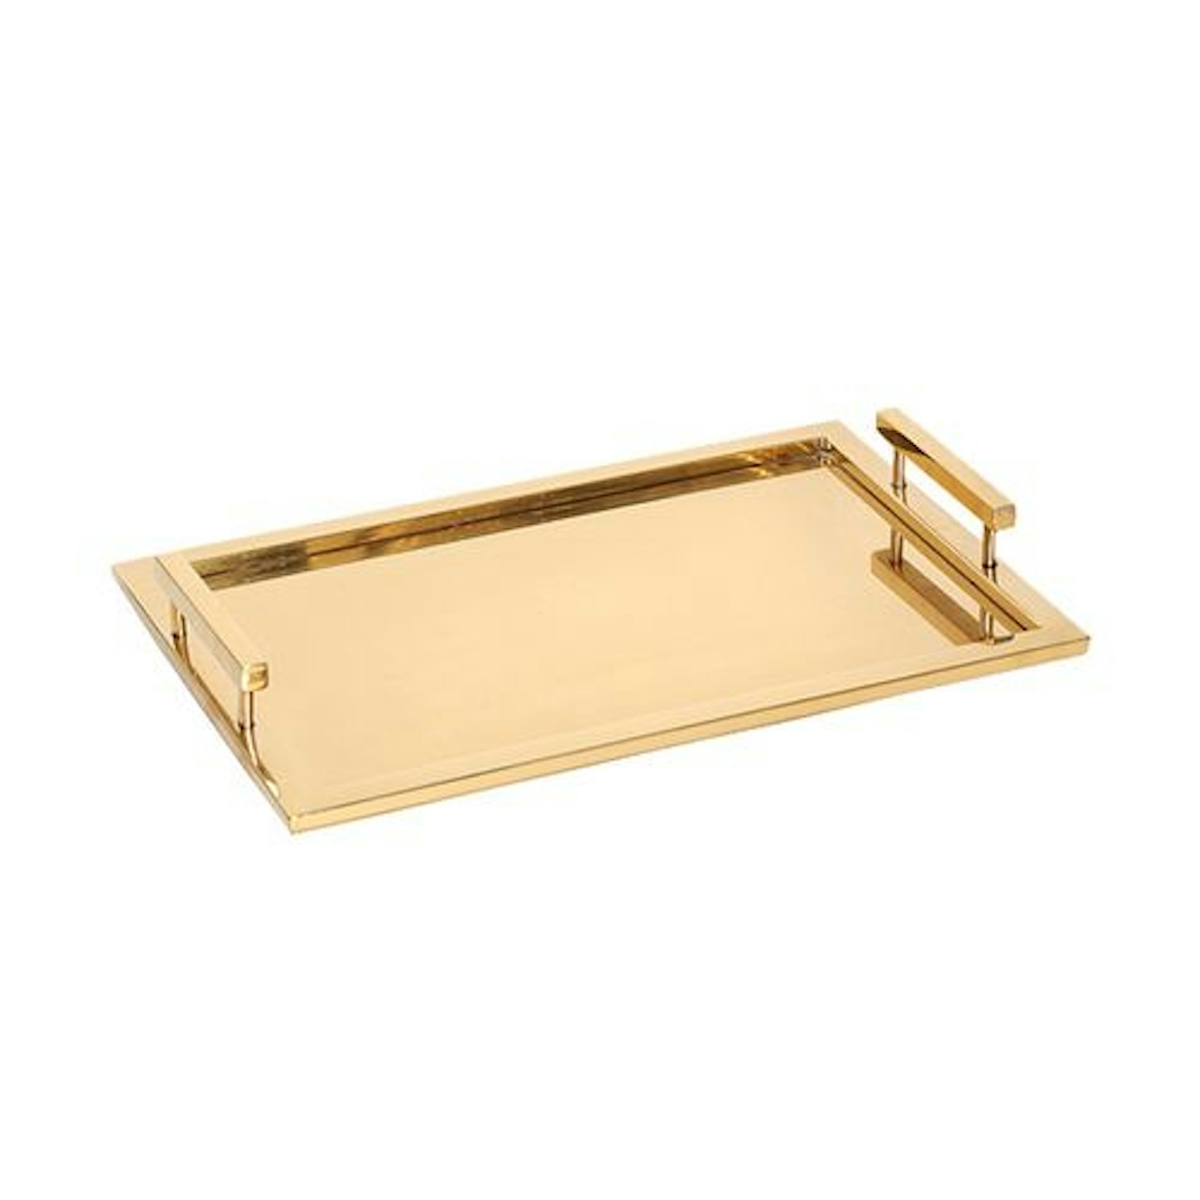 Polished Tray, Gold - 21 Best Decorative Trays To Buy For Your Tabletop - LuxDeco.com